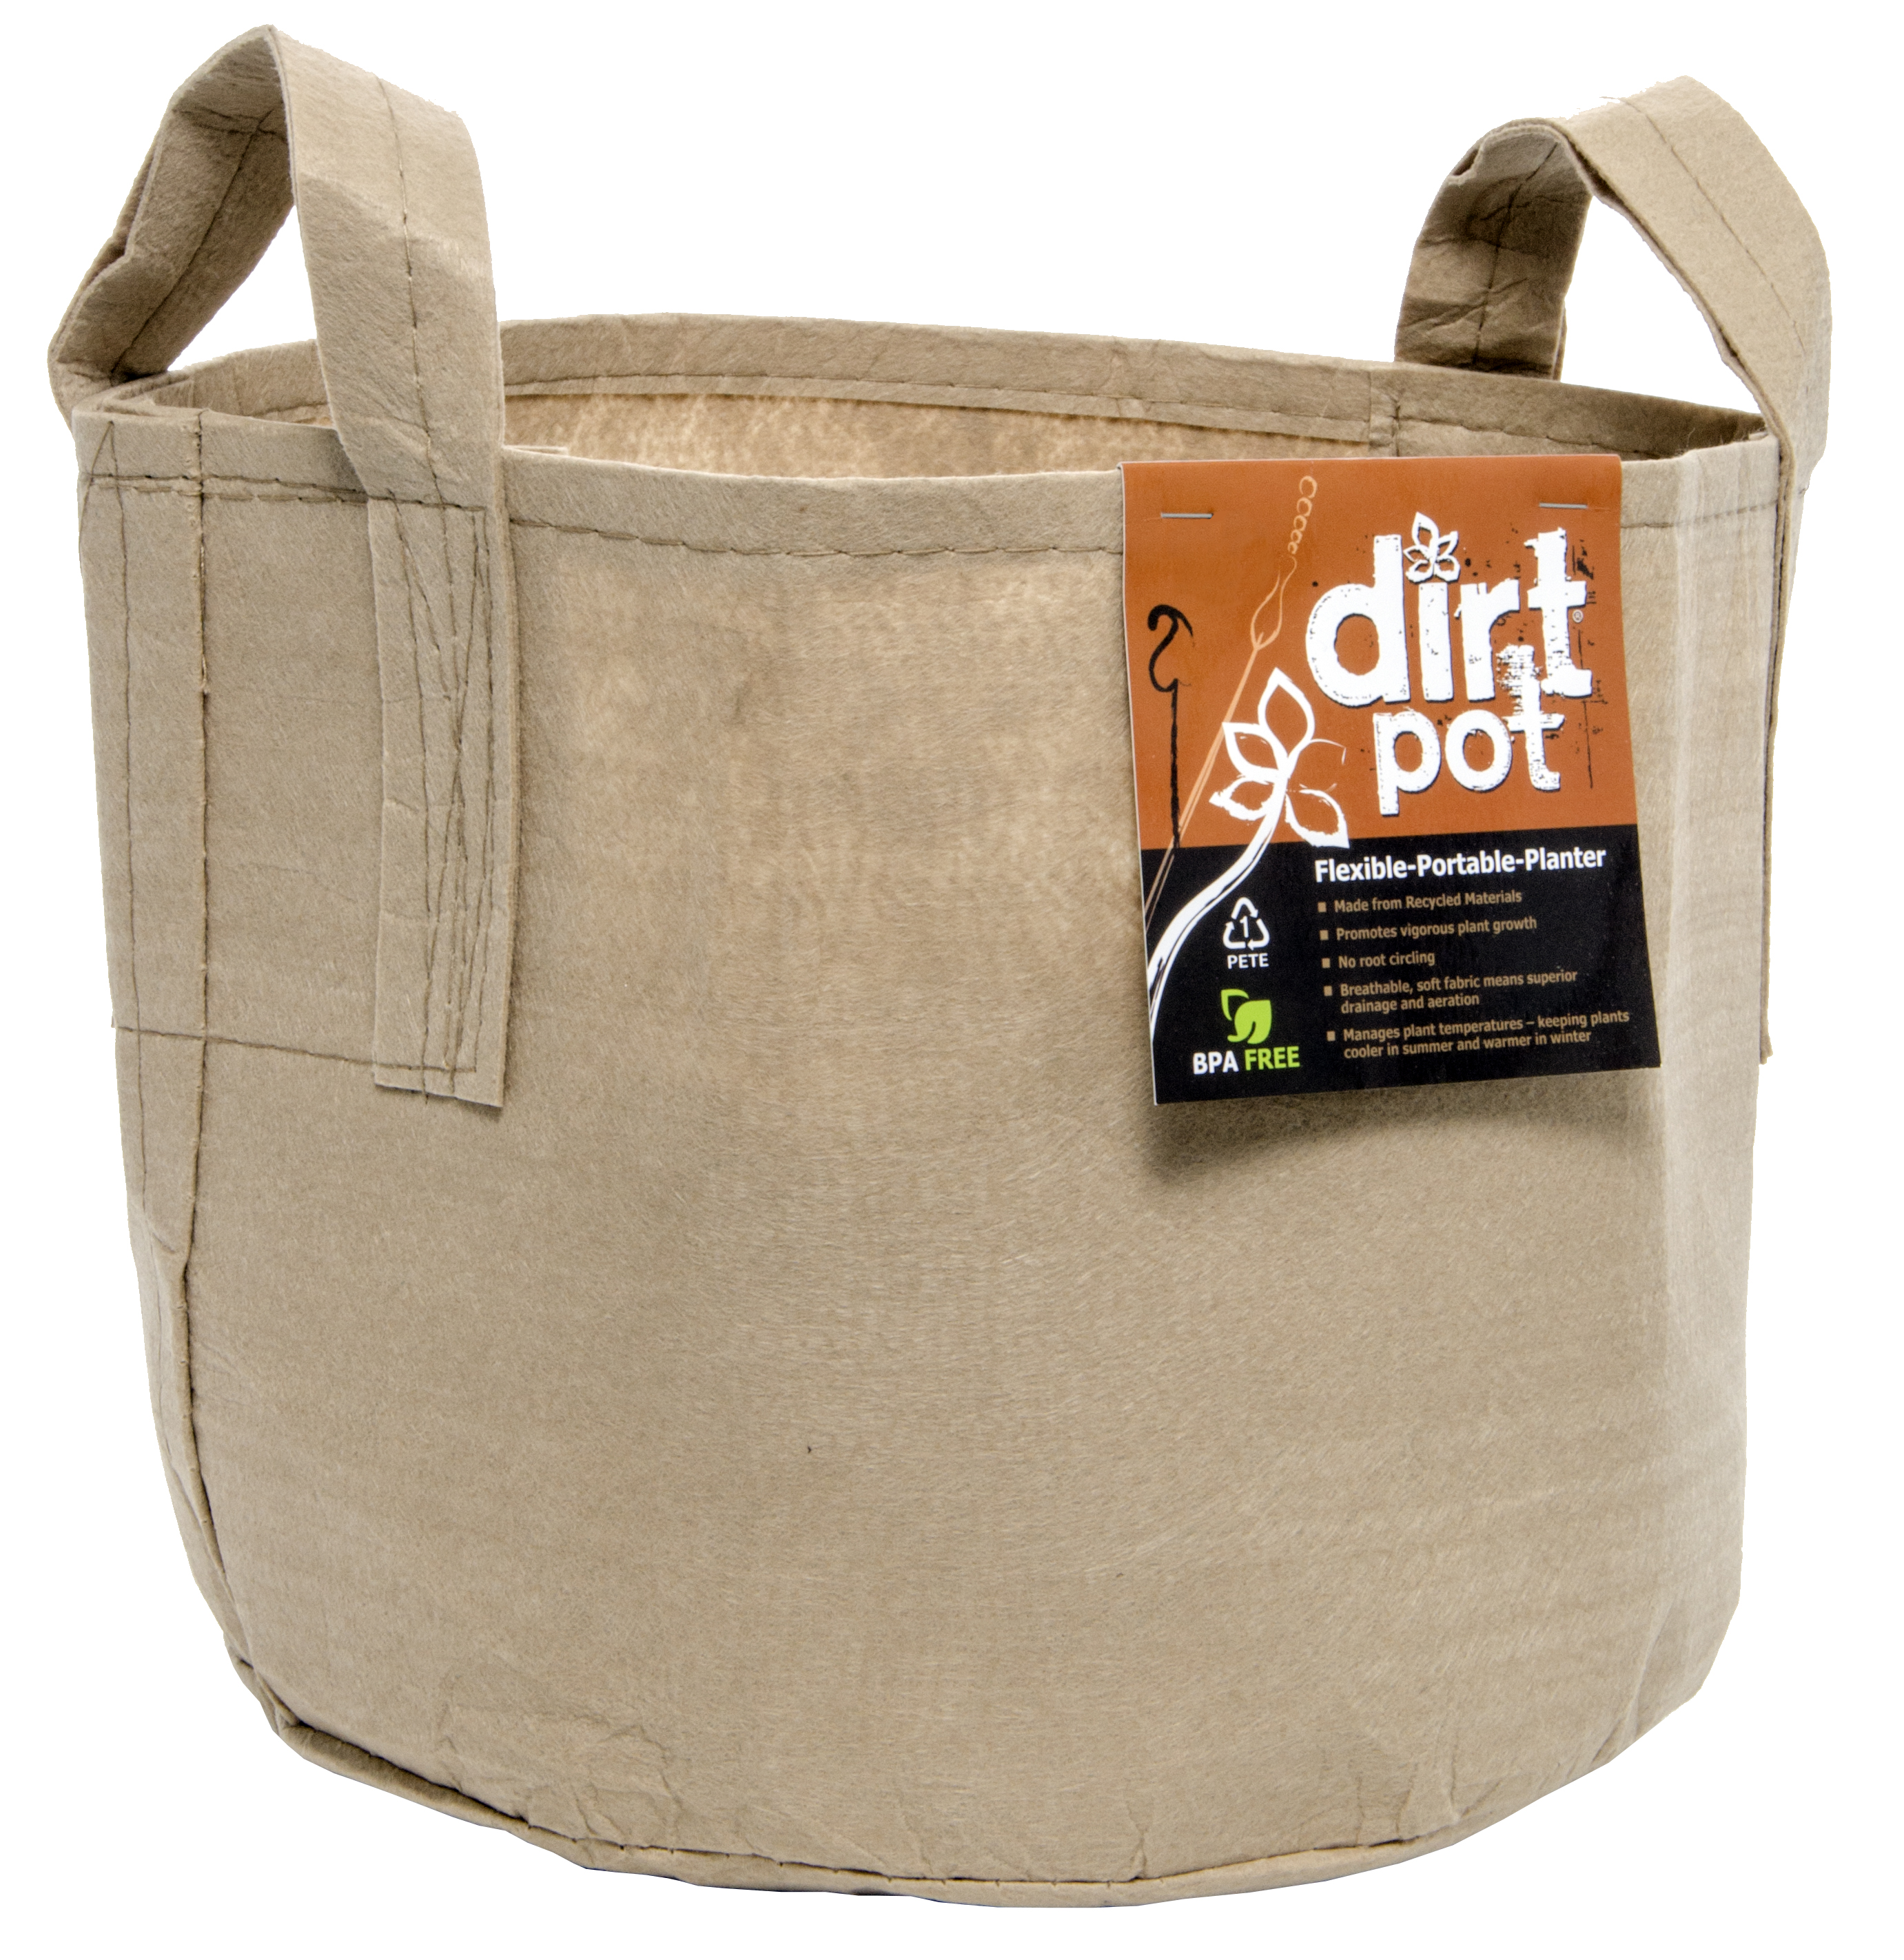 Picture for Dirt Pot Flexible Portable Planter, Tan, 10 gal, with handles